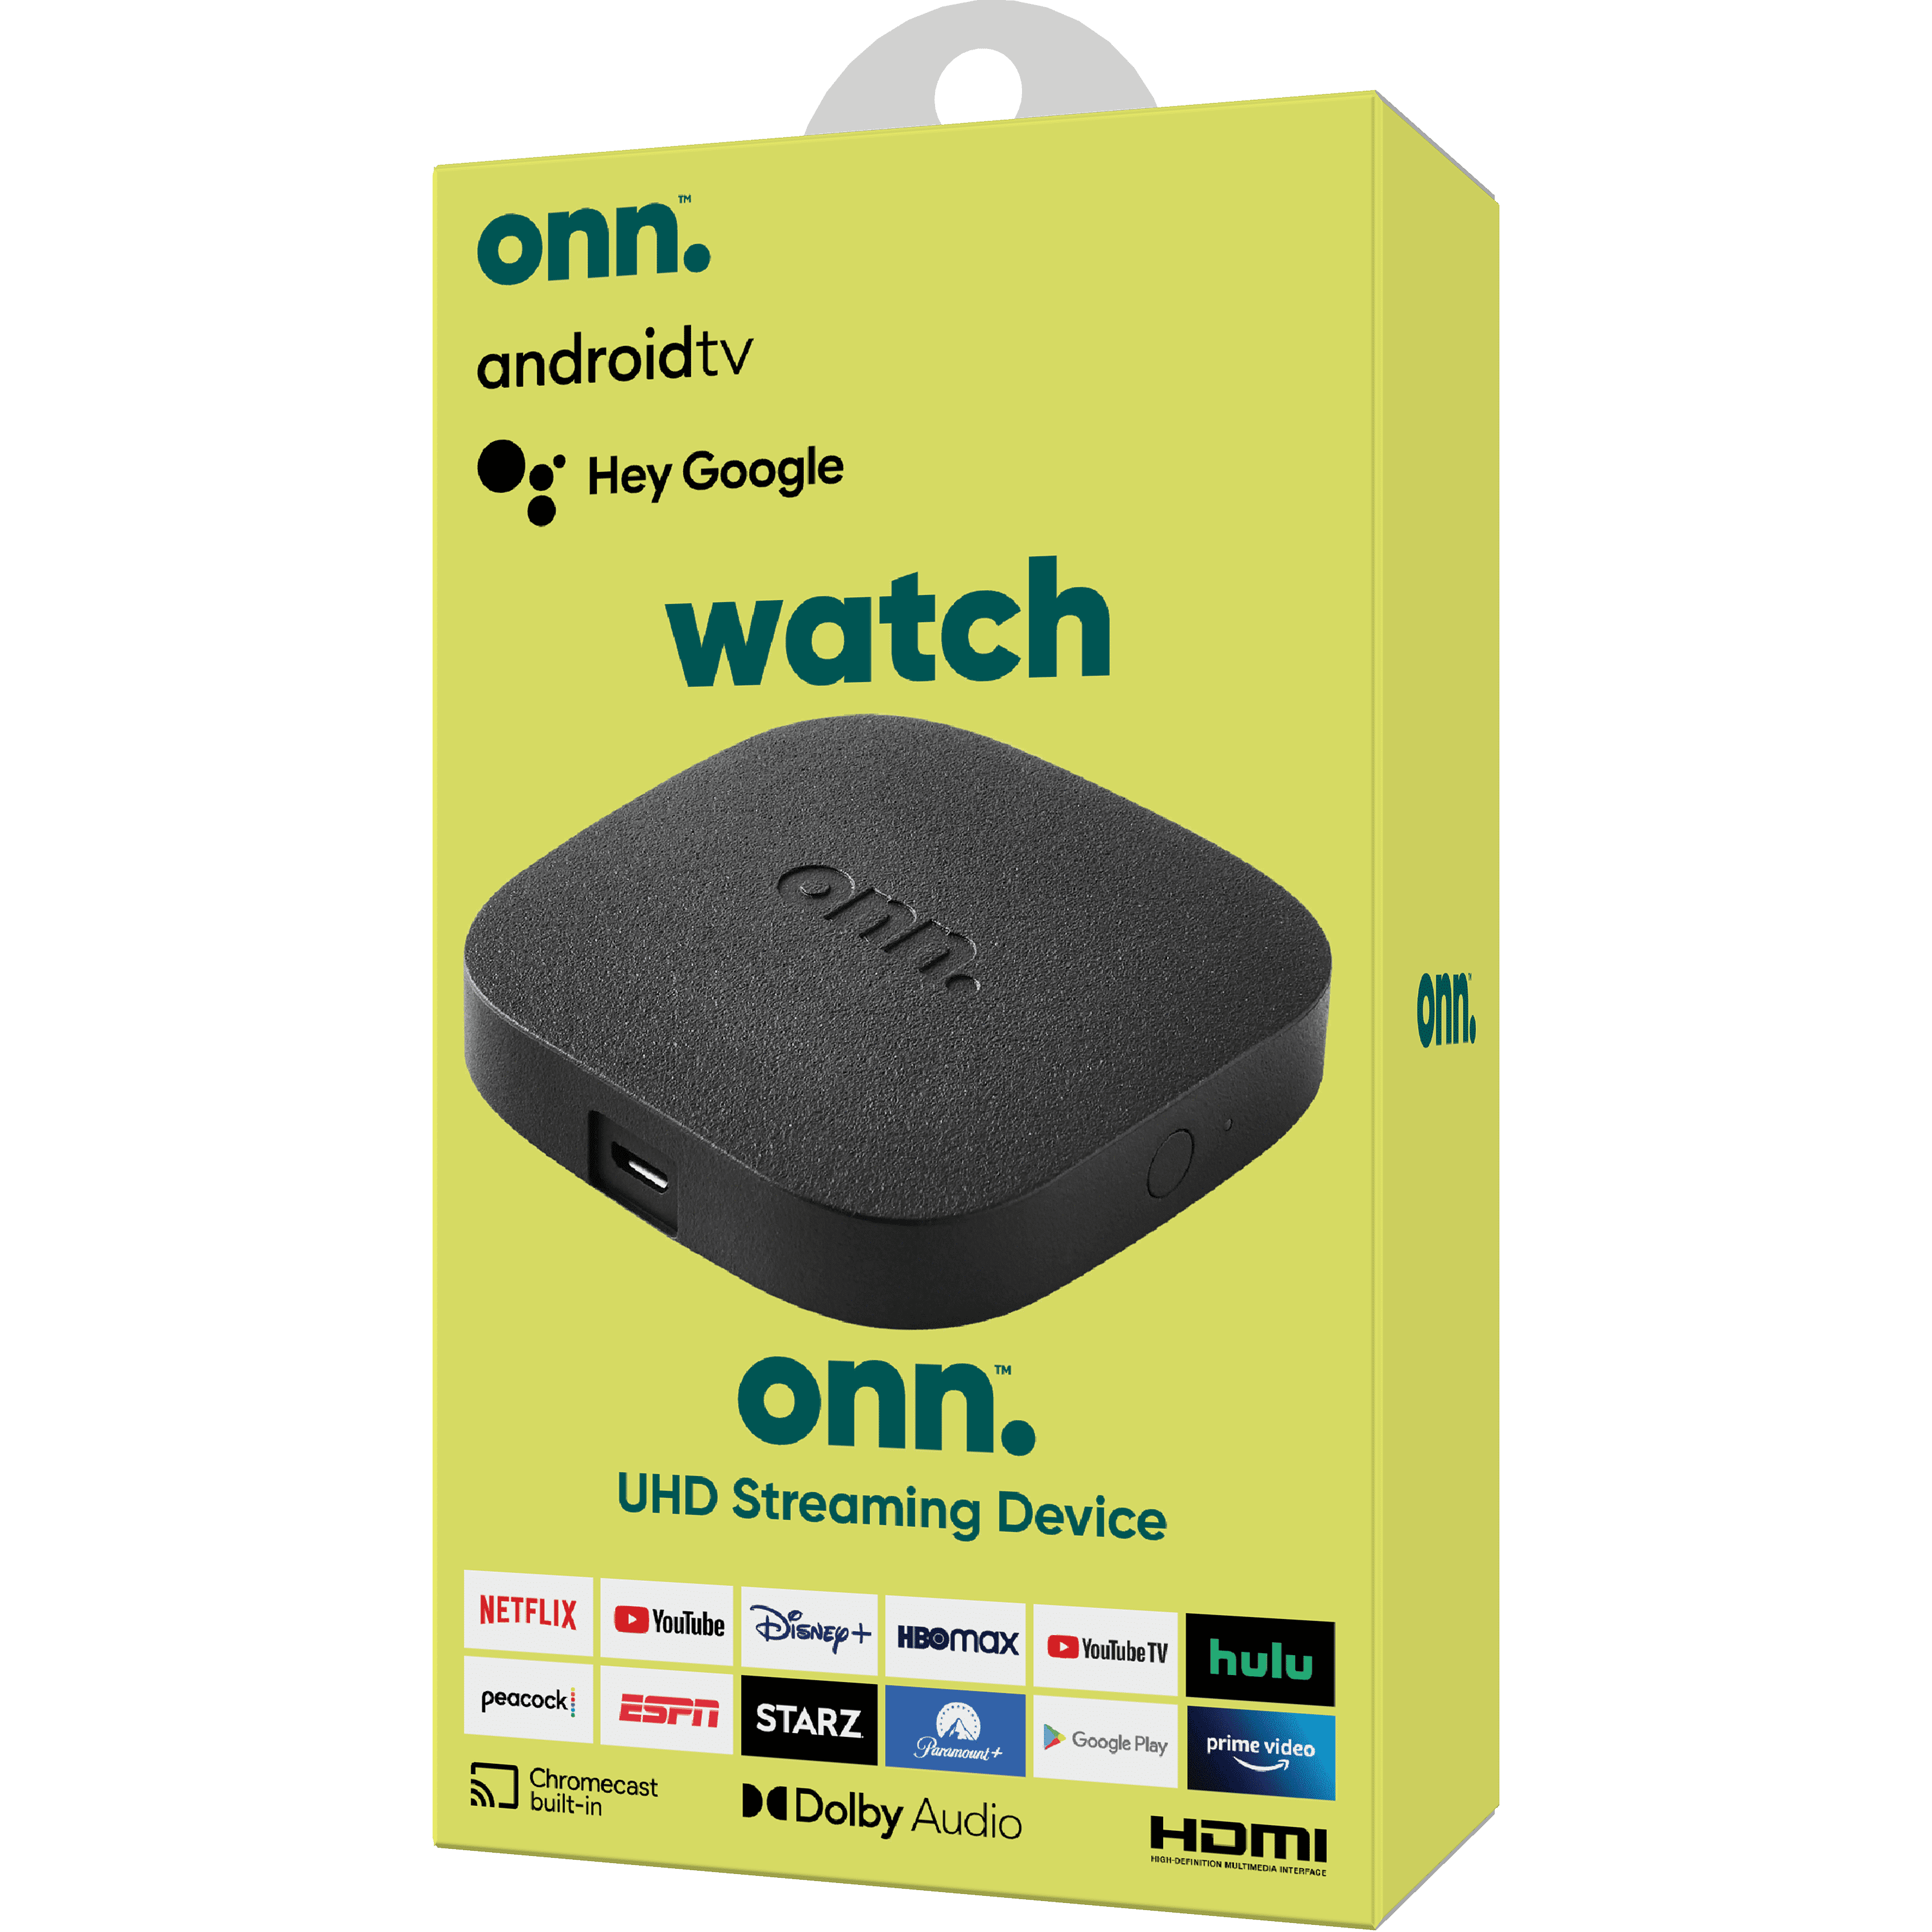 ONN. android UHD Streaming device. half